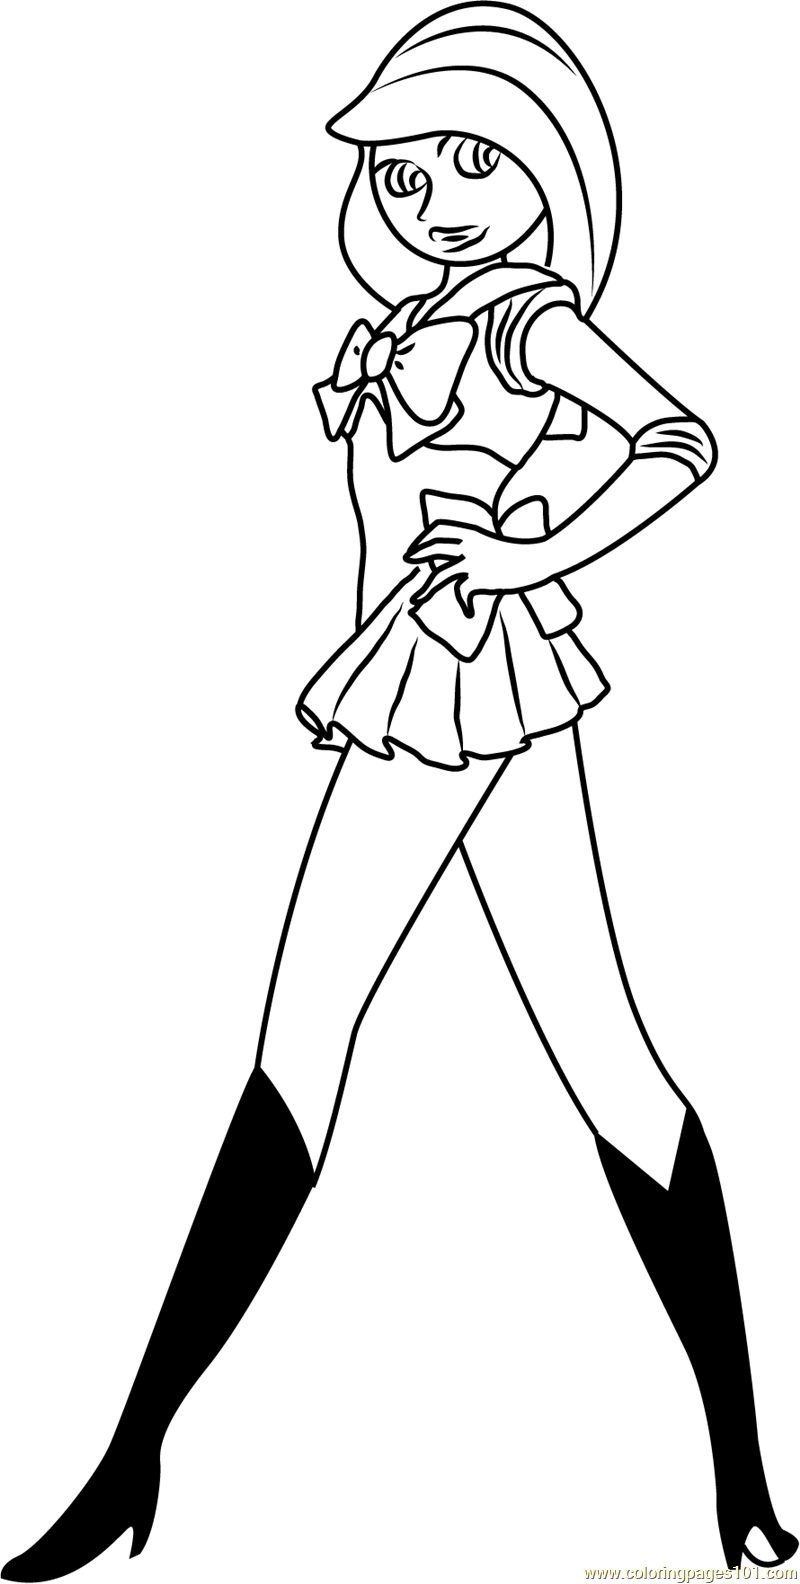 Kim Possible Shego Coloring Page